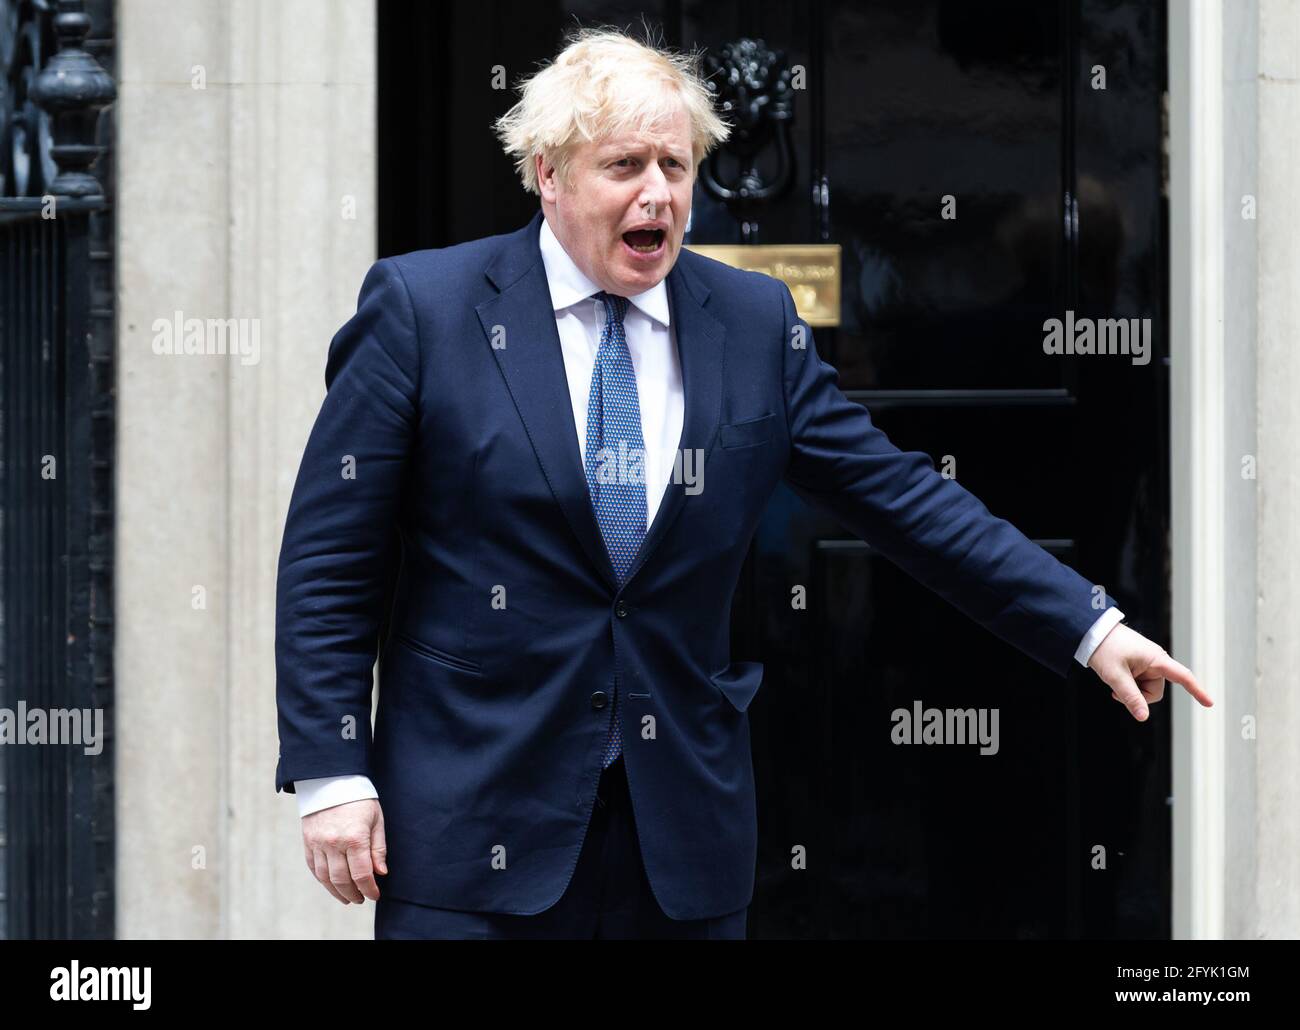 LONDON, UK. MAY 28TH. Viktor Orbán the Hungarian Prime Minister is greeted by British Prime Minister Boris Johnson visits Downing Street, London on Friday 28th May 2021. (Credit: Tejas Sandhu | MI News) Credit: MI News & Sport /Alamy Live News Stock Photo